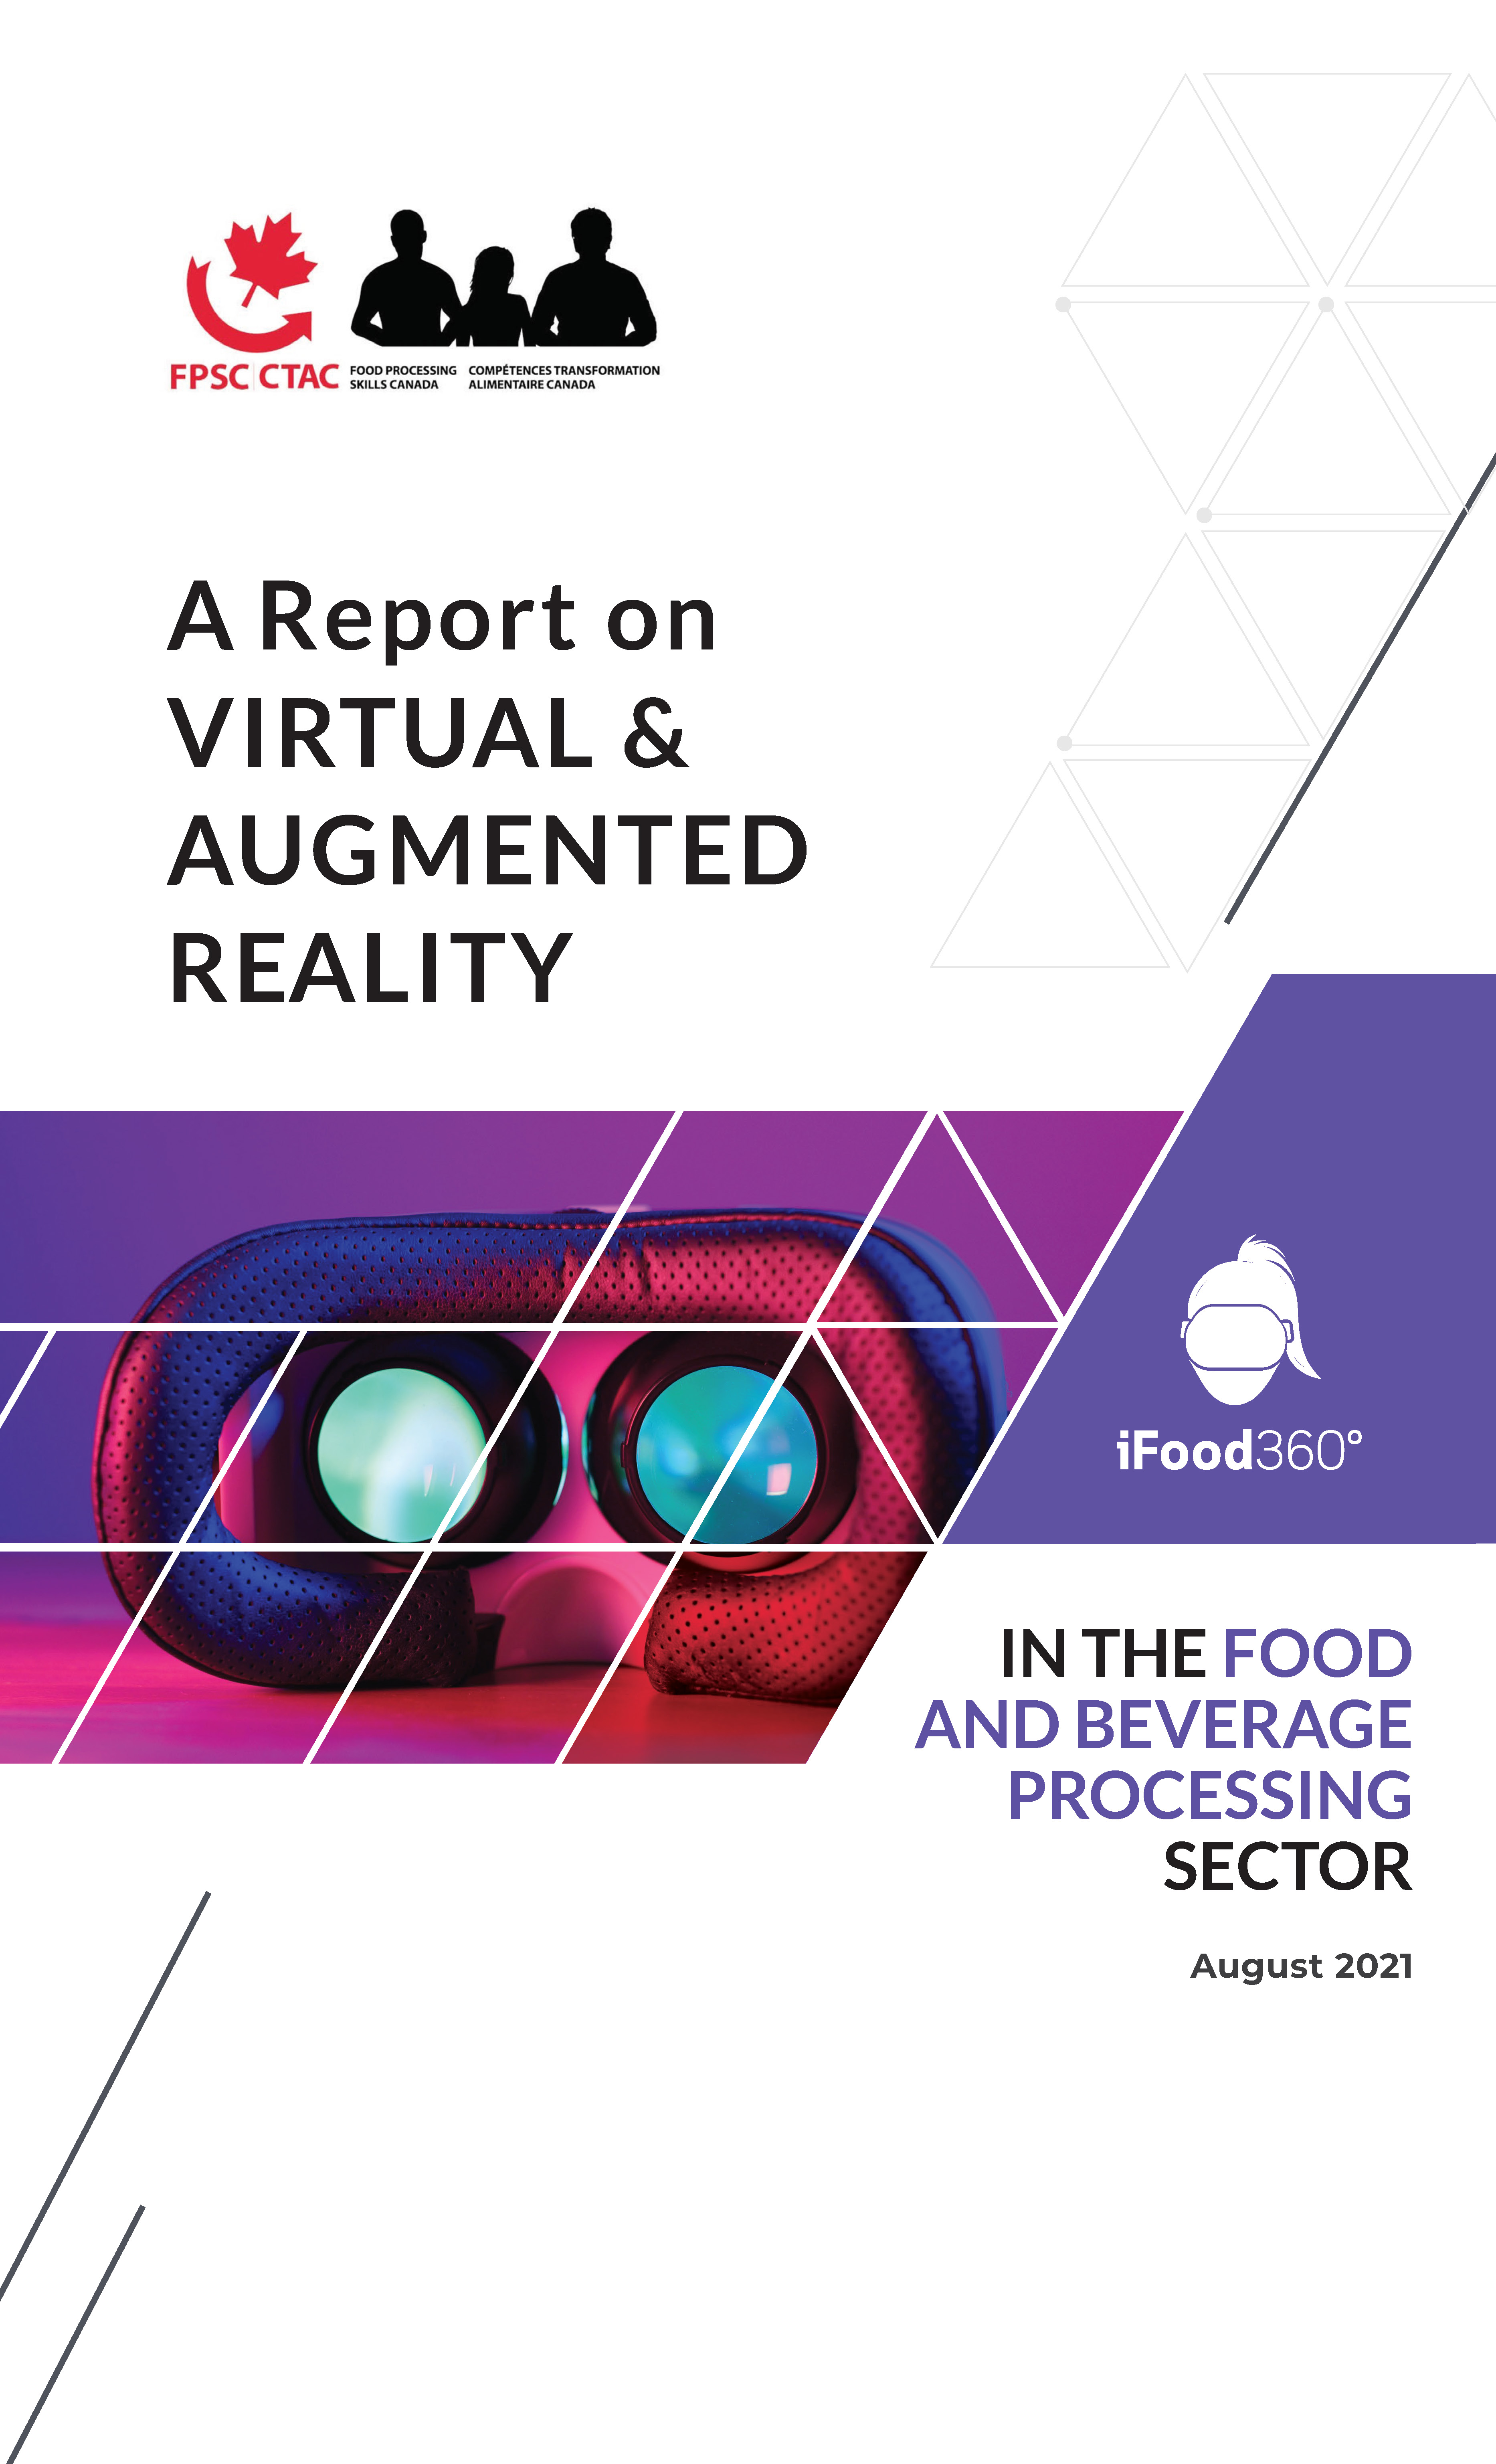 A Report on VIRTUAL & AUGMENTED REALITY